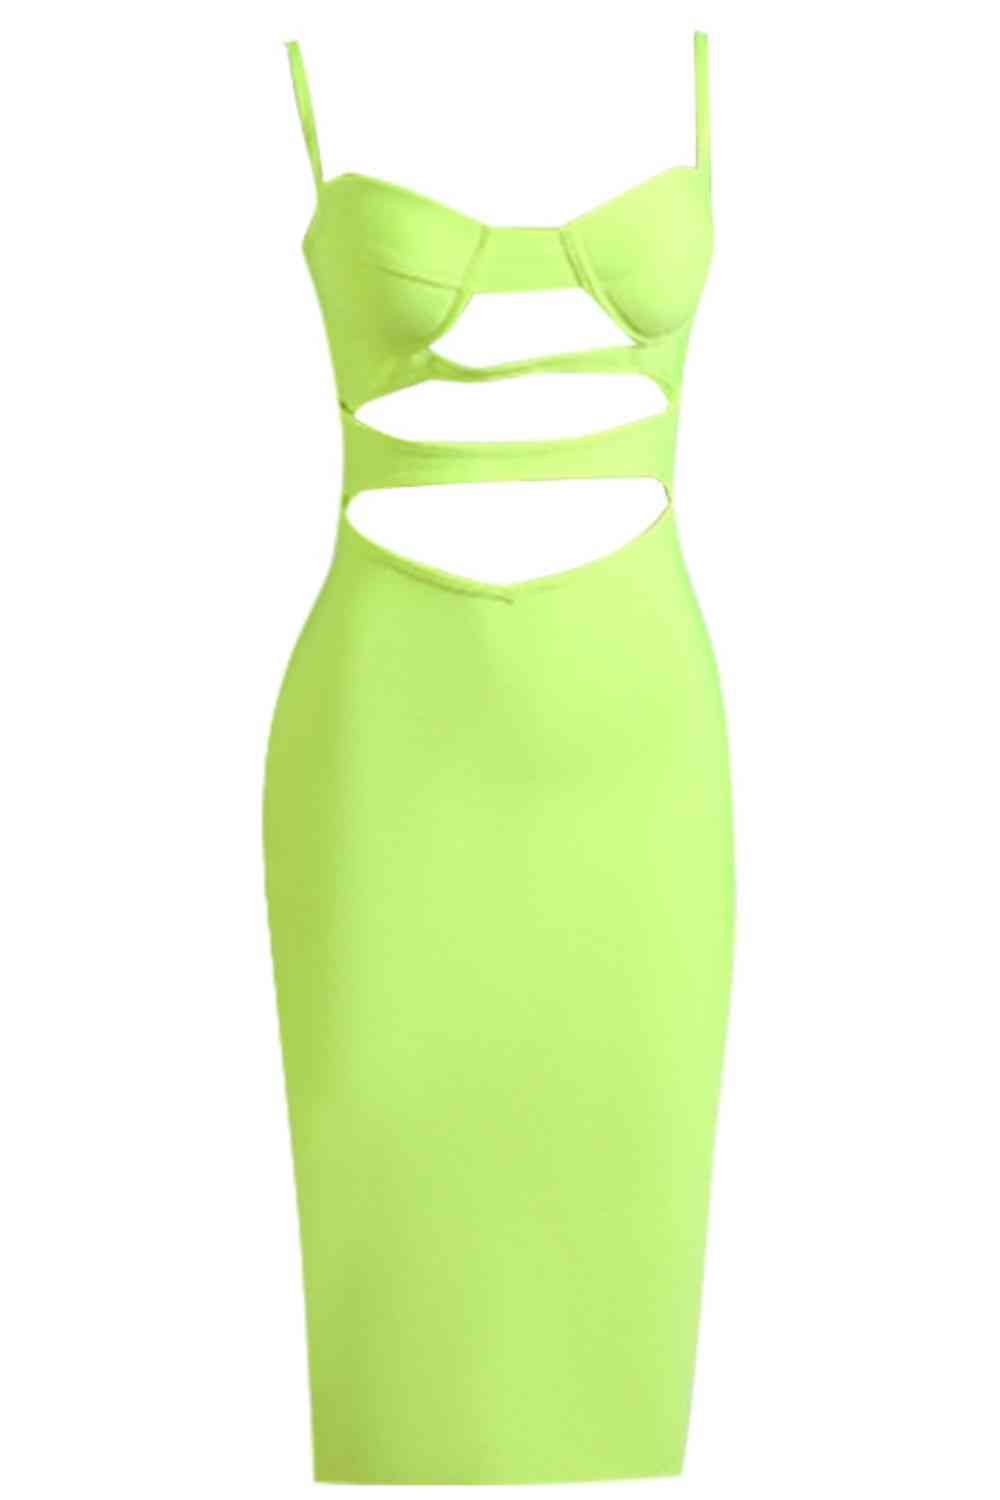 a green dress with cut outs on it